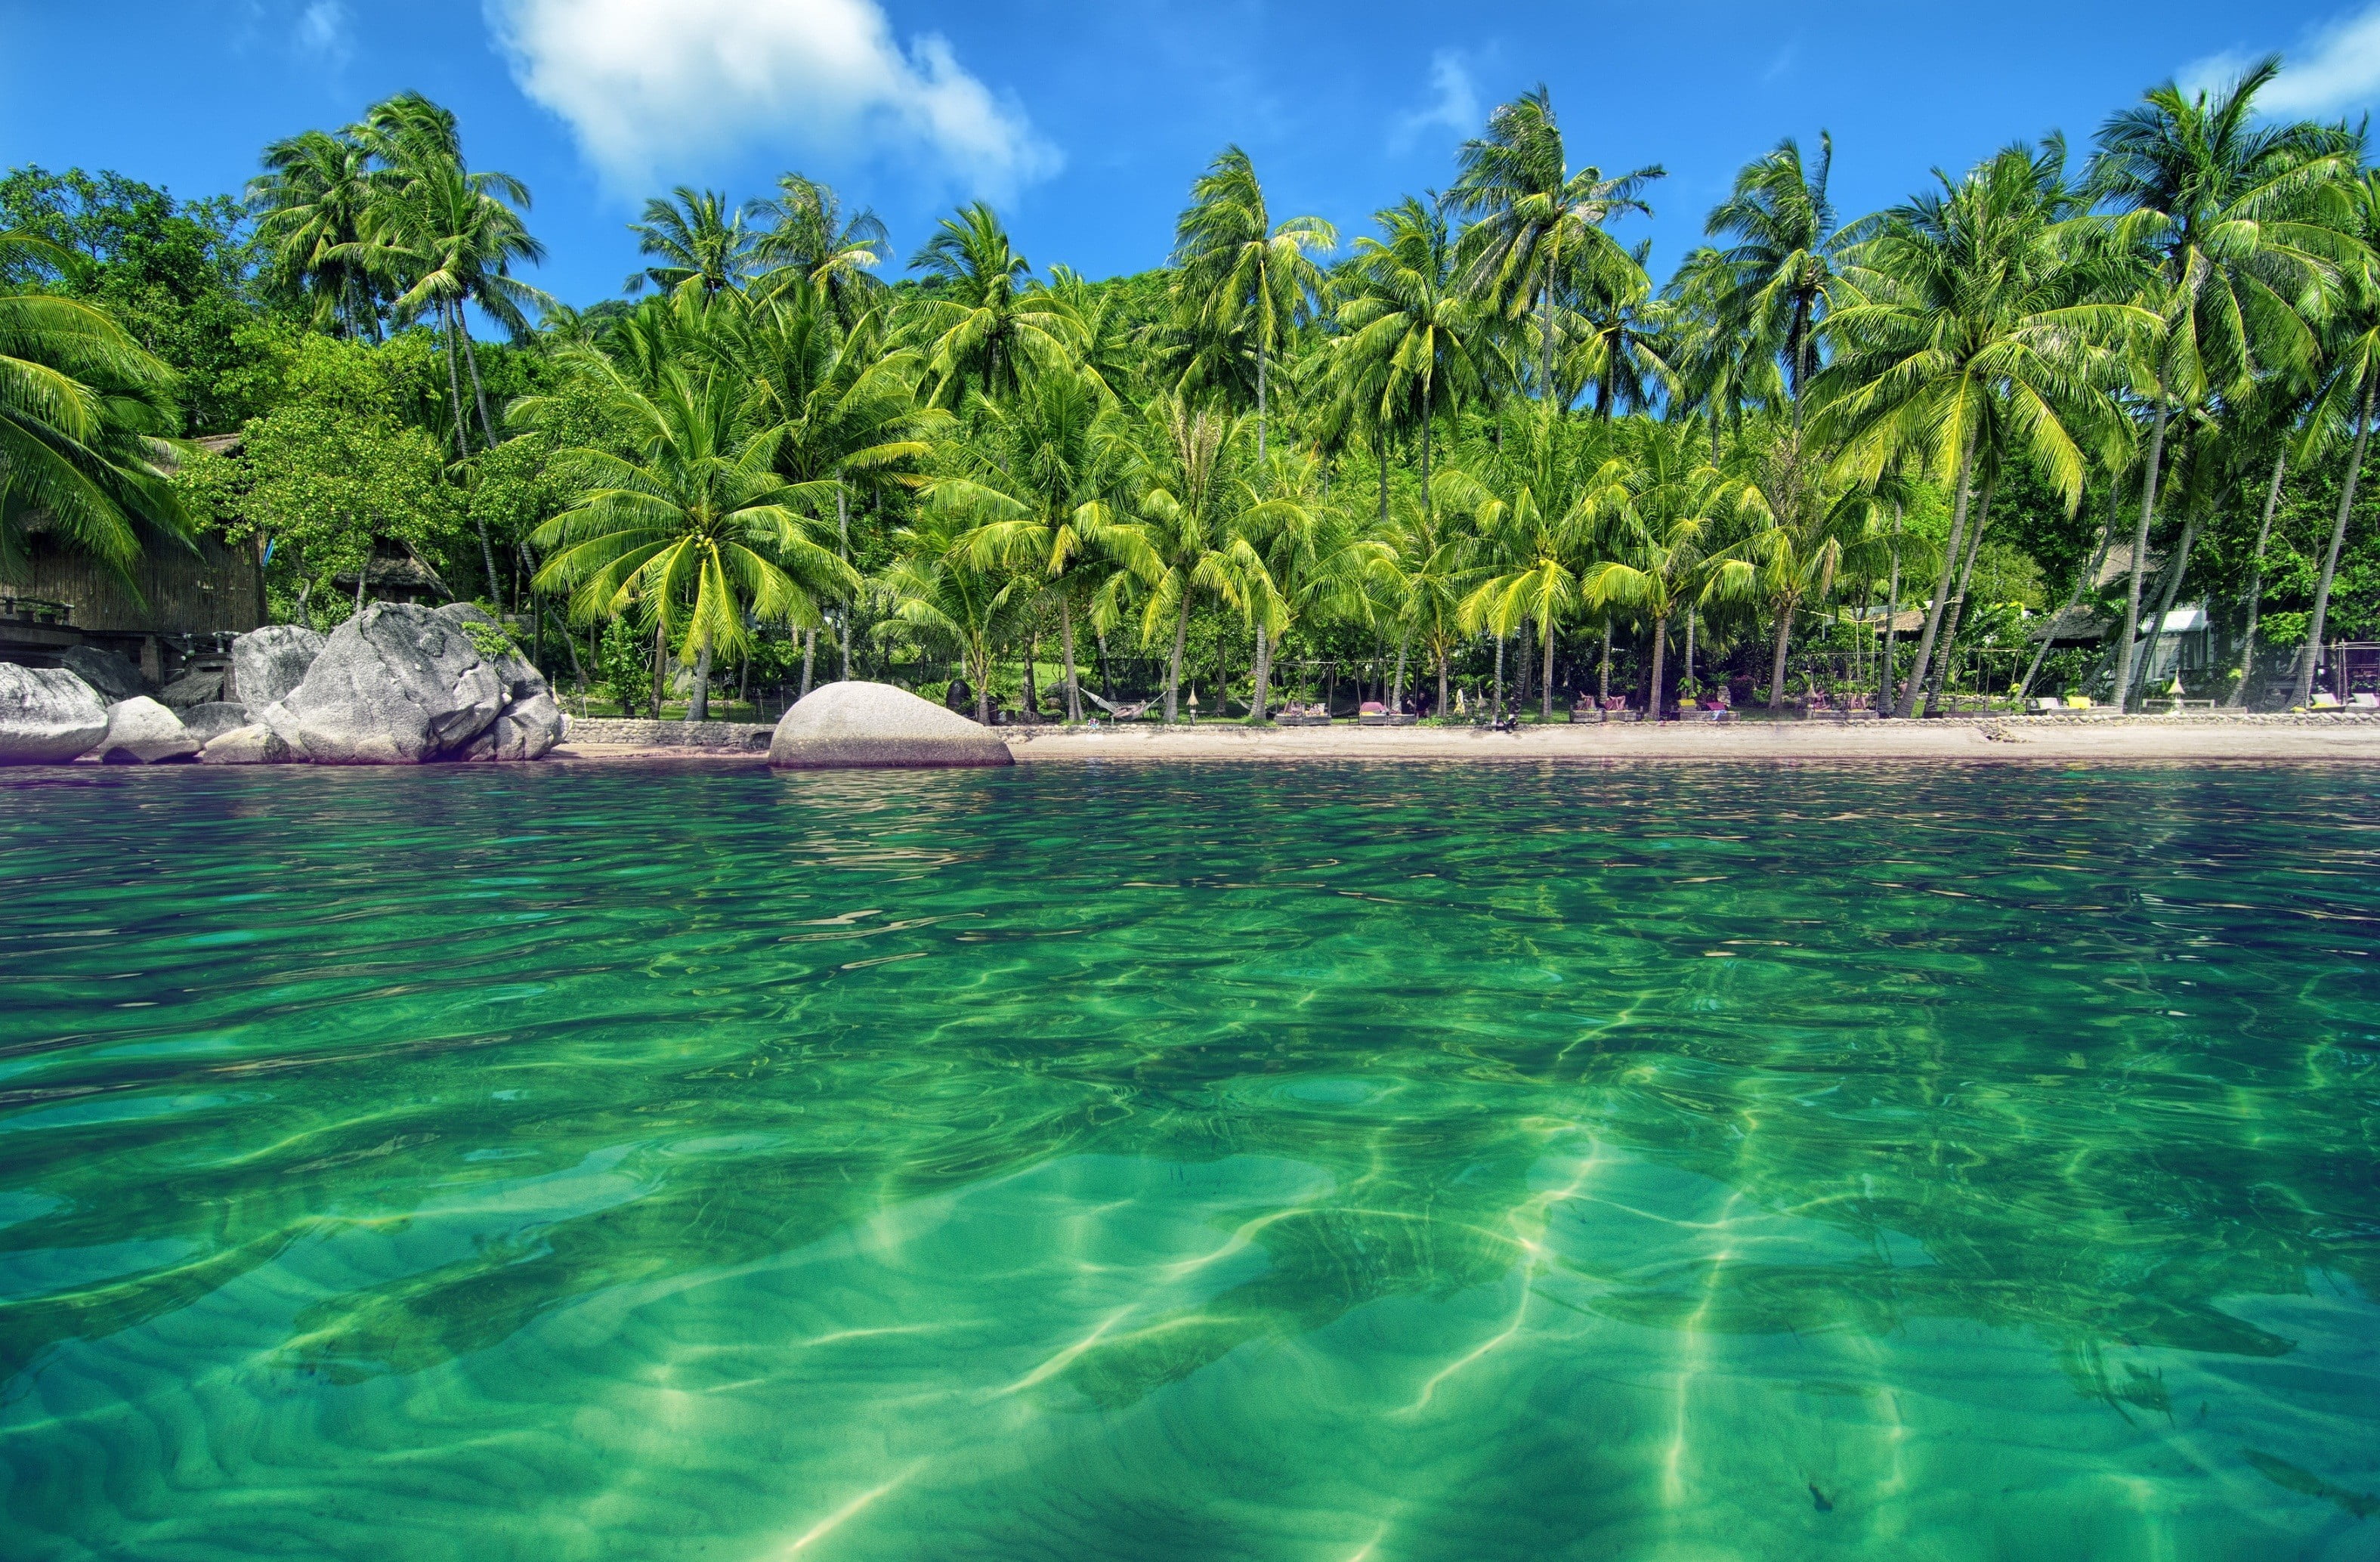 green coconut trees, palm trees, water, beach, tropical